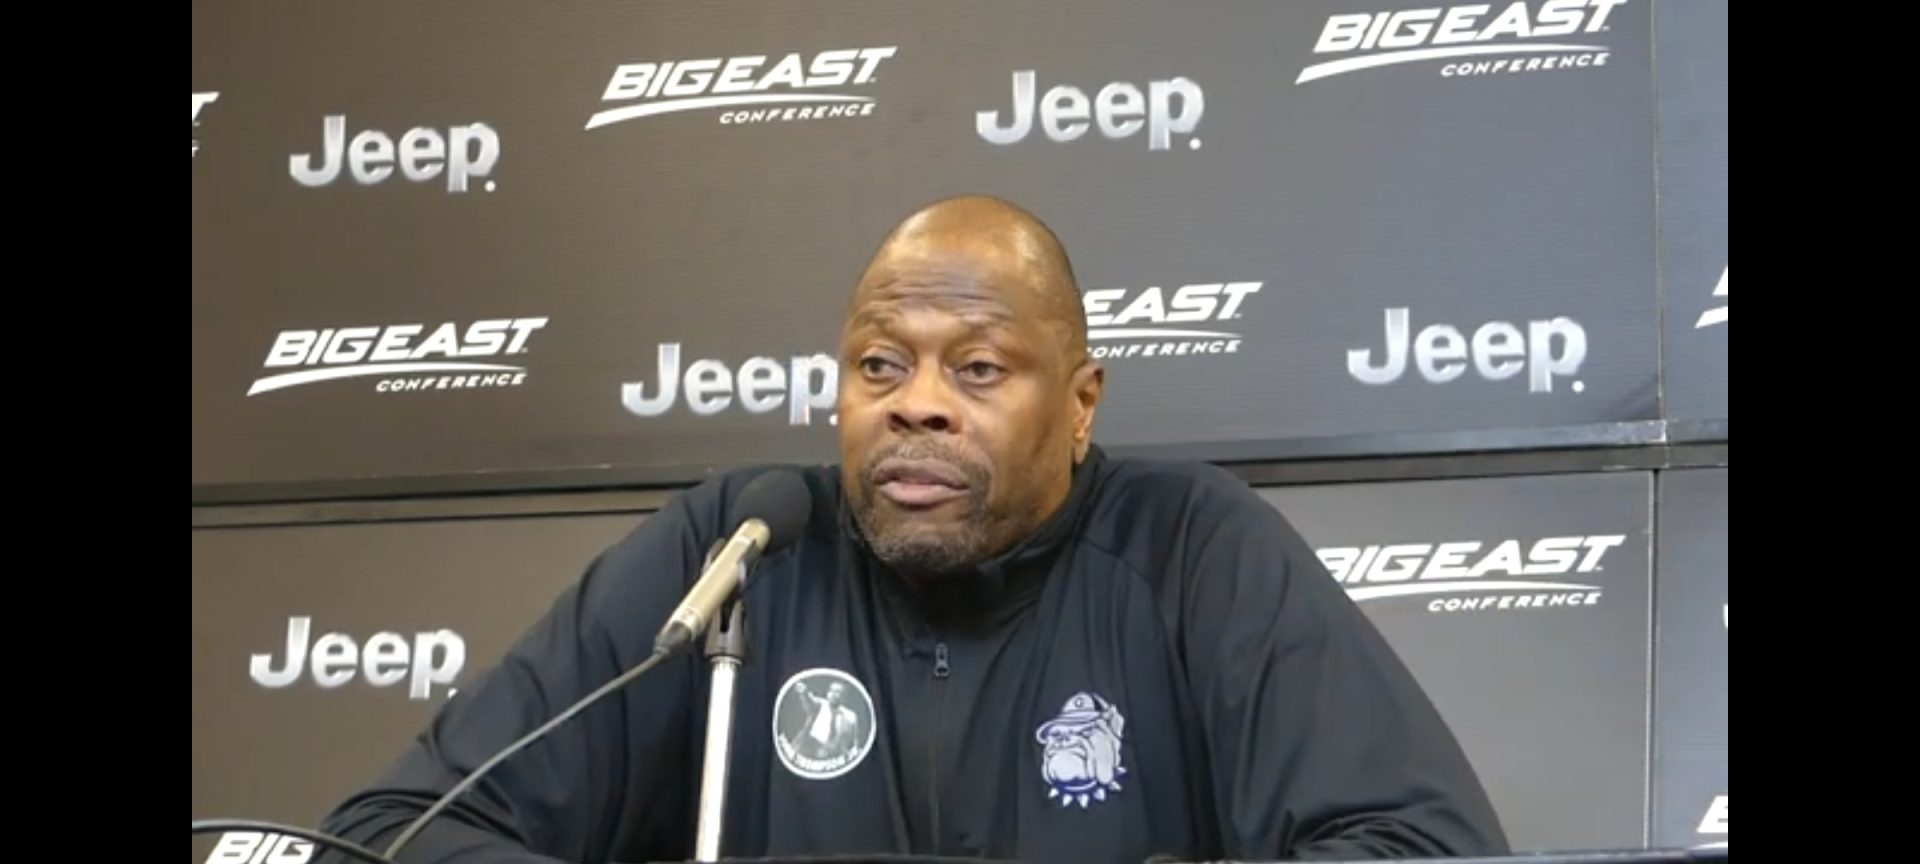 Patrick Ewing at his final press conference as men's basketball coach for the Georgetown Hoyas. (Photo by Derrel Jazz Johnson)